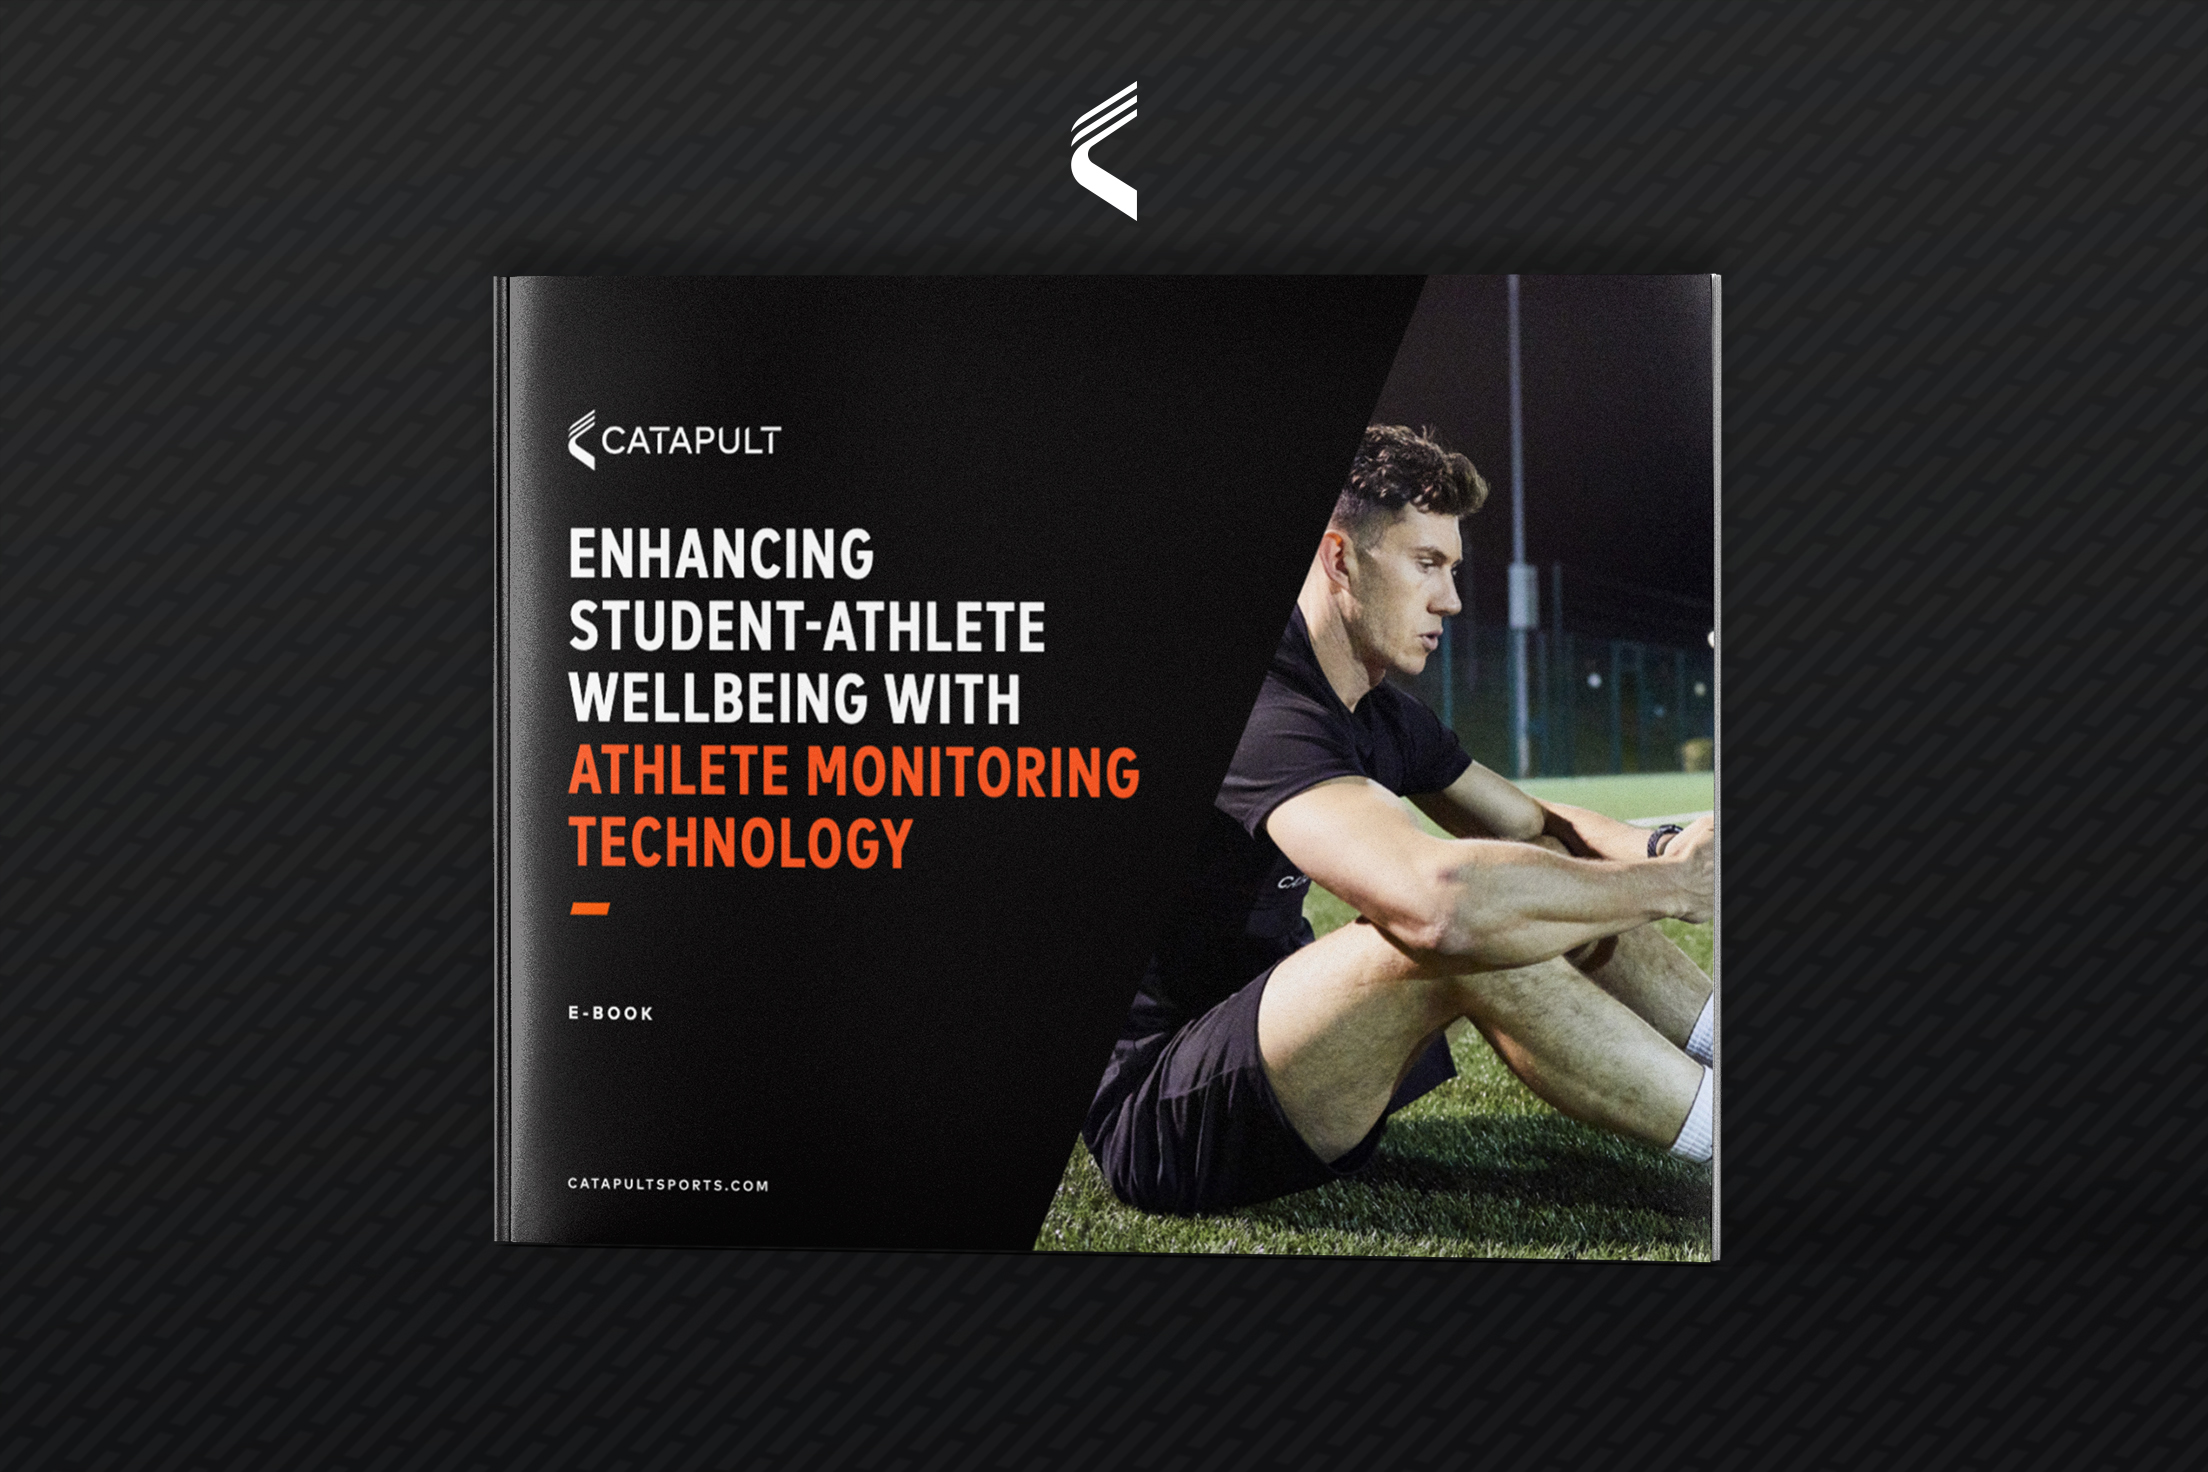 Technology And Athlete Performance And Safety